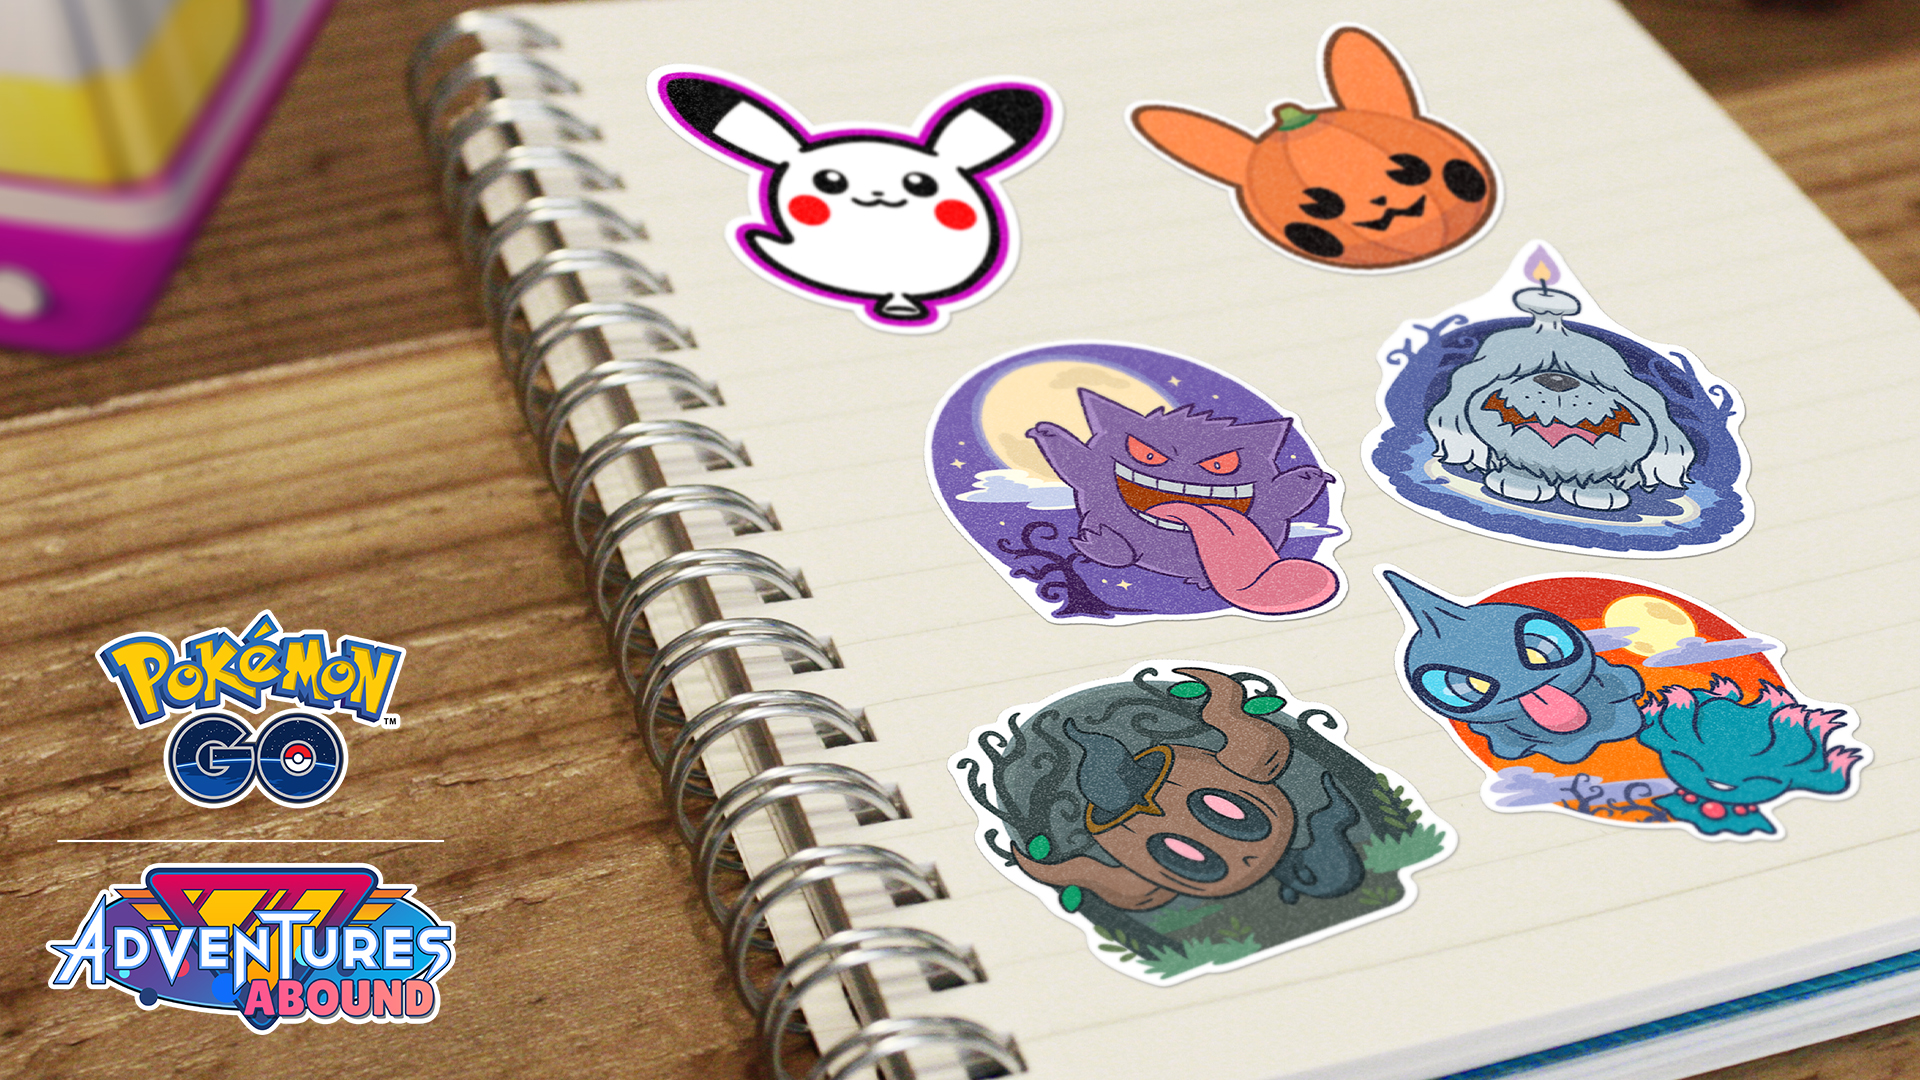 Pokémon Global News - Halloween Stickers are available in the Pokémon GO  Store 10 for 35 Coins 30 for 80 Coins